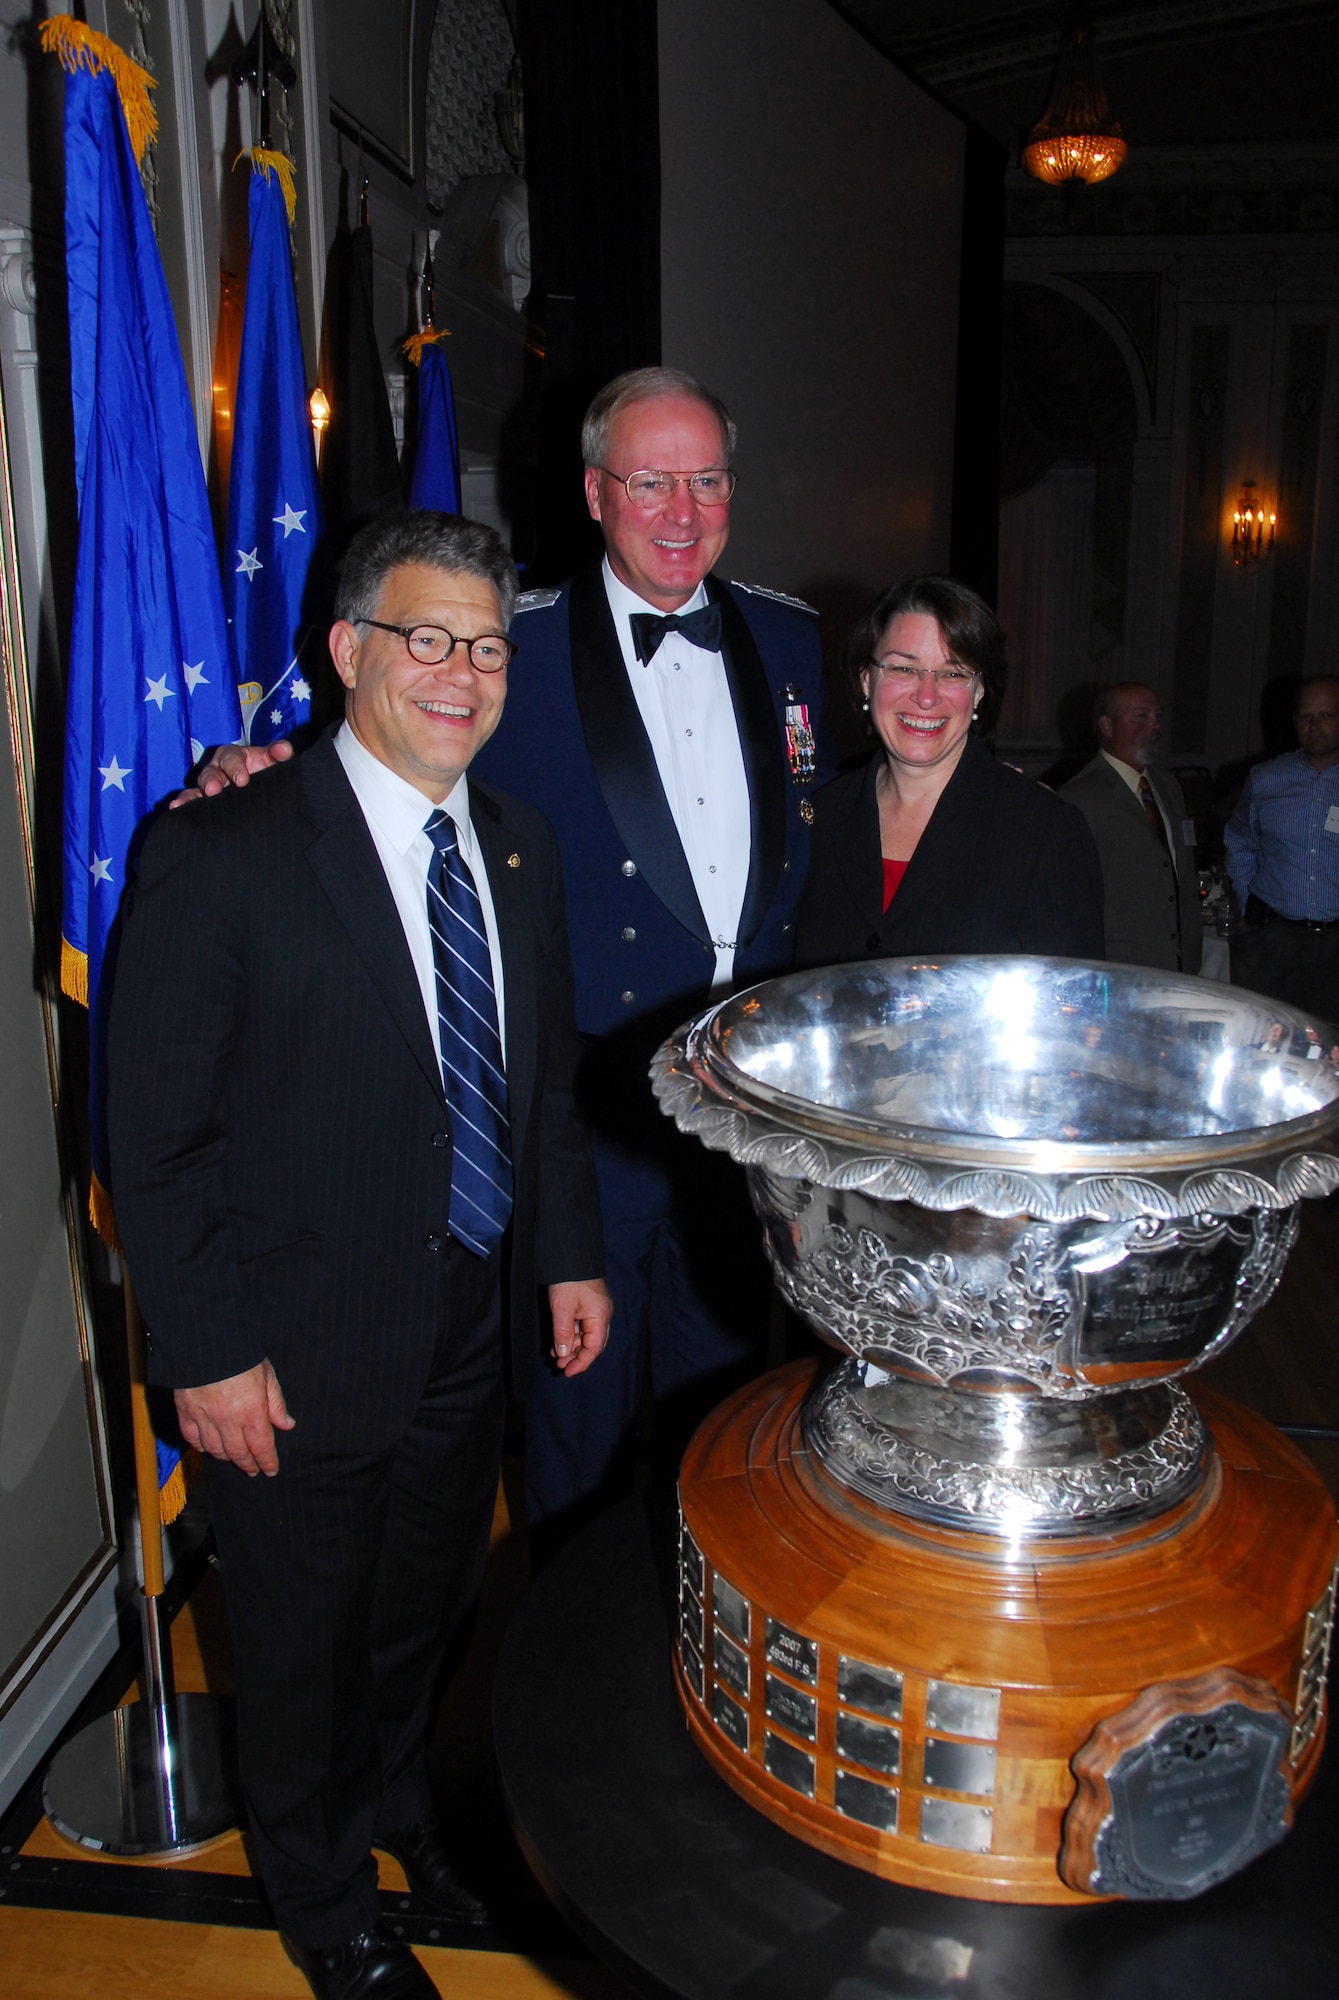 U.S. Air Force General Craig R. McKinley-Chief, National Guard Bureau, (center) poses with U.S. Senators Al Franken and Amy Klobachar after the presentation to the 148th Fighter Wing, Duluth, Minn. of the prestigious Raytheon Trophy July 31, 2009 in Duluth, Minn.  The Raytheon Trophy was awarded to the 179th Fighter Squadron of the 148th Fighter Wing as the most outstanding air defense unit in the U.S. Air Force, marking only the fourth time an Air National Guard unit received this award since its inception in 1953.  (U.S. Air Force photo by Tech. Sgt. Brett R. Ewald) 